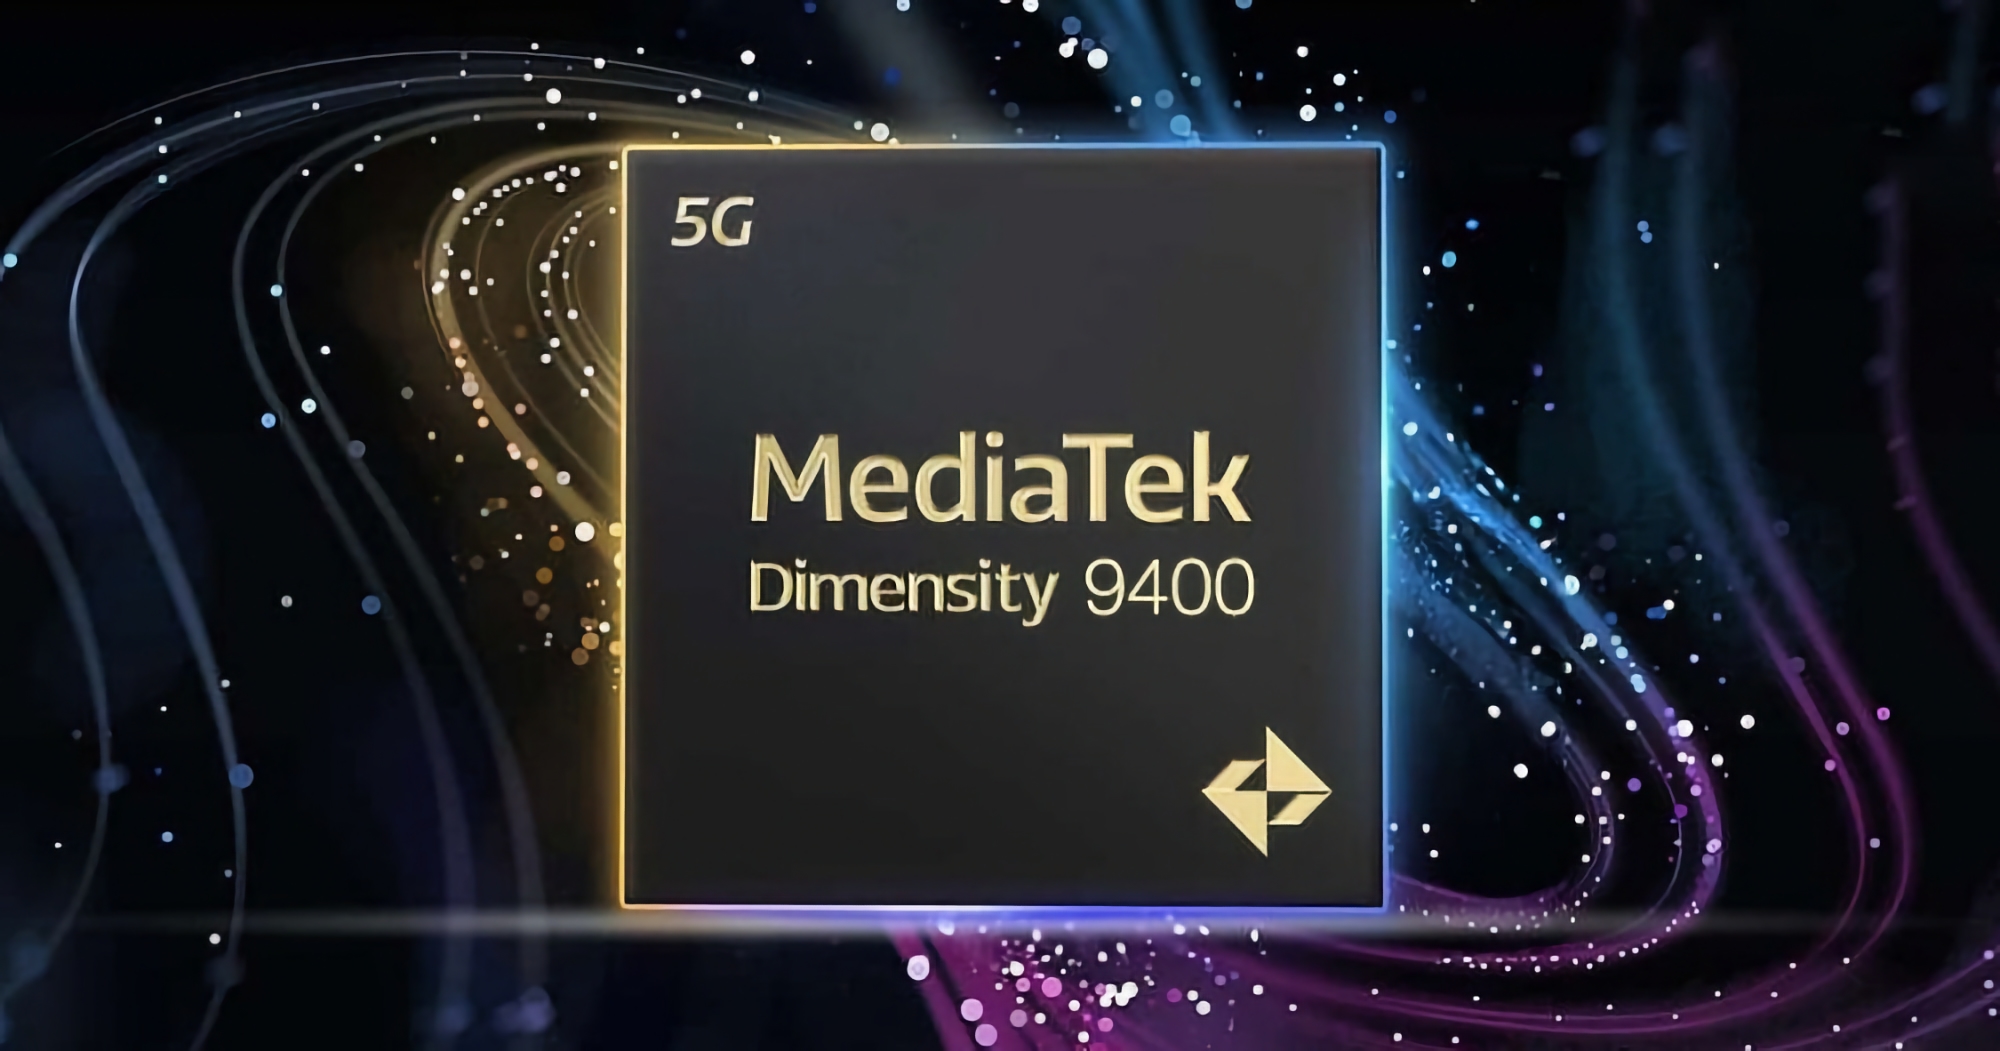 Insider: MediaTek Dimensity 9400 will get the new ARM BlackHawk architecture and will be more powerful than Apple and Qualcomm chips